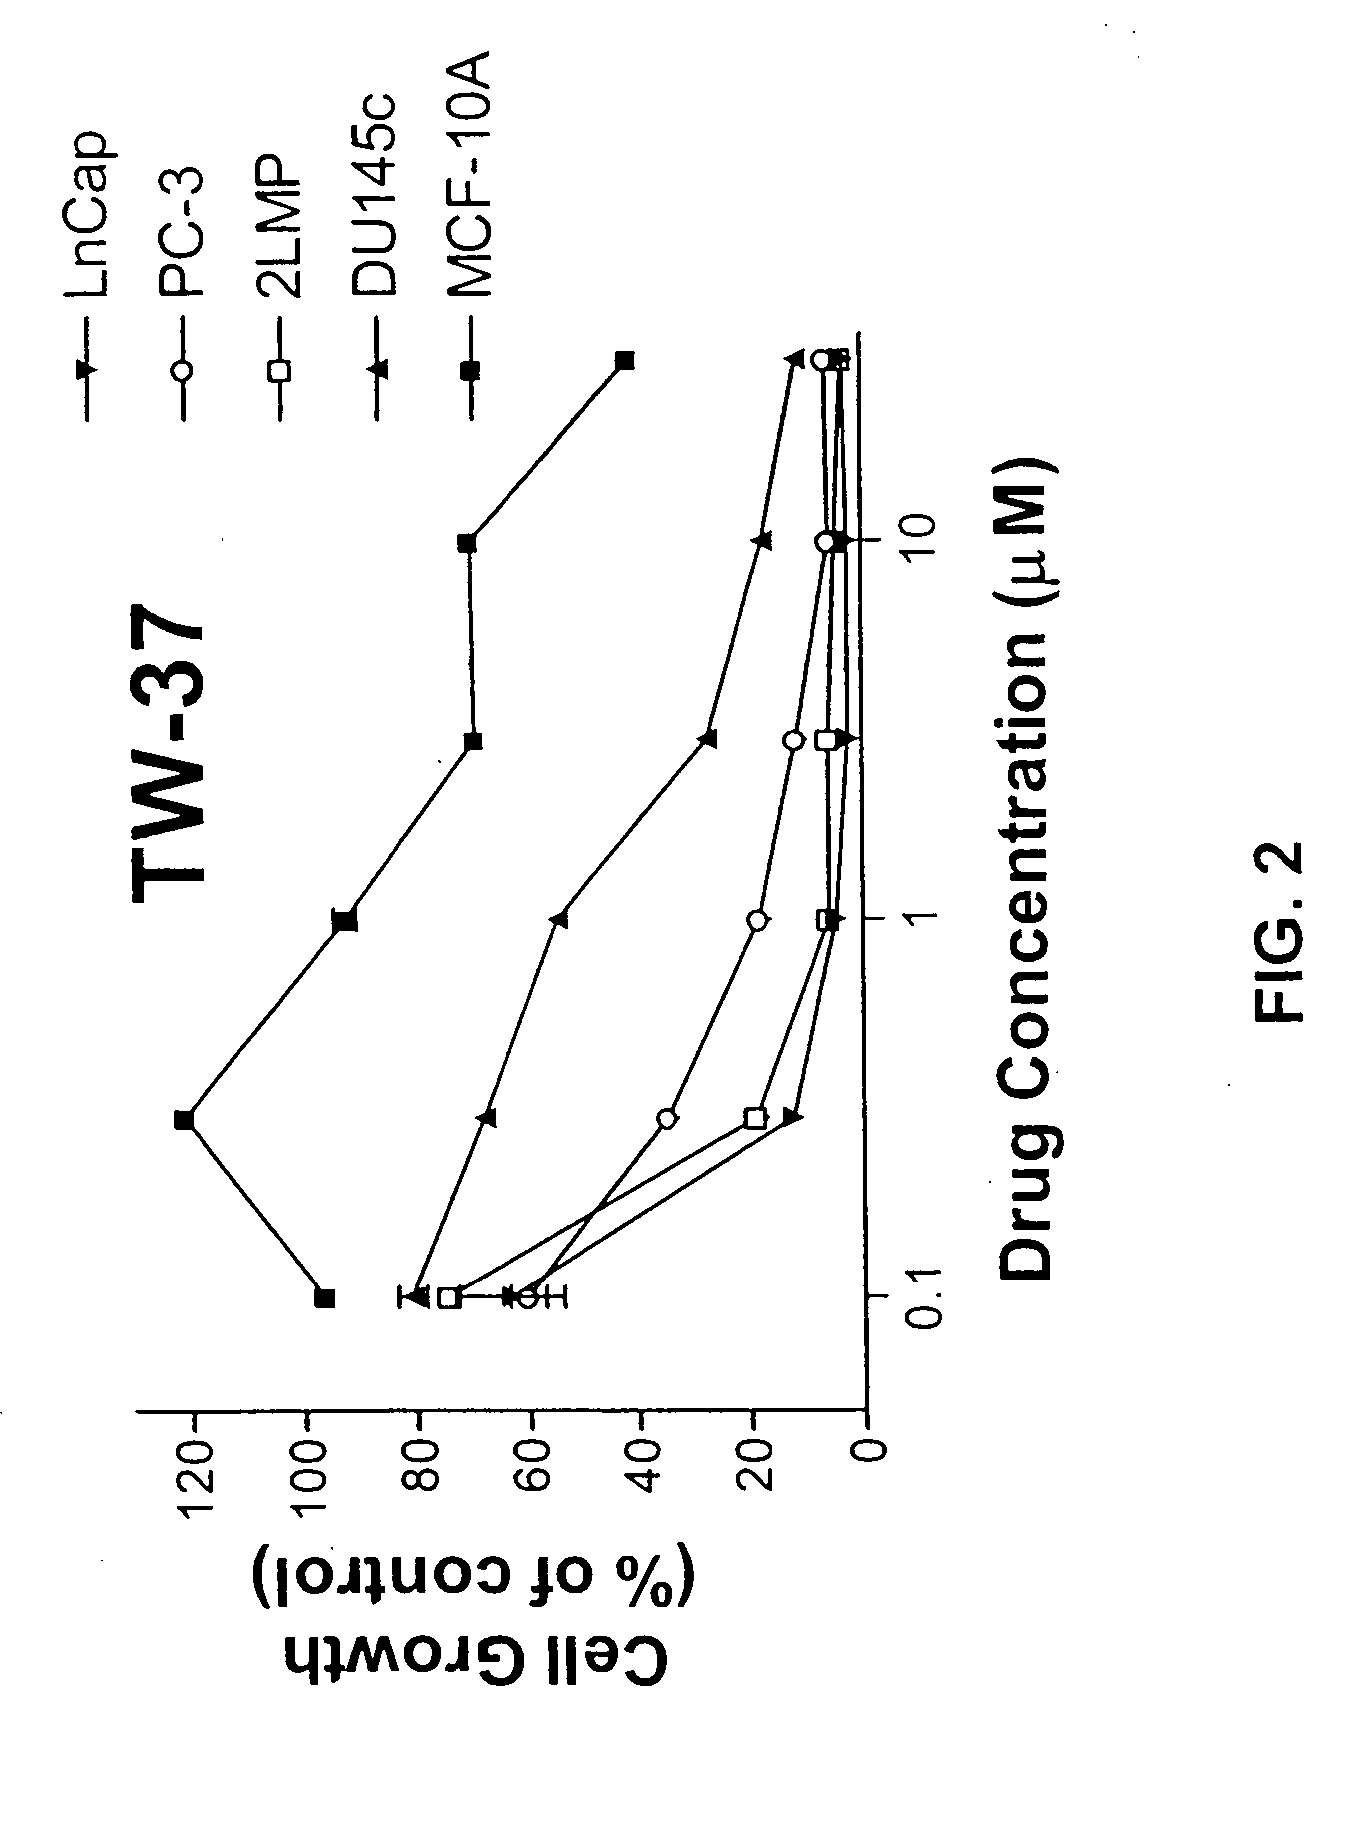 Small molecule inhibitors of anti-apoptotic BCL-2 family members and the uses thereof